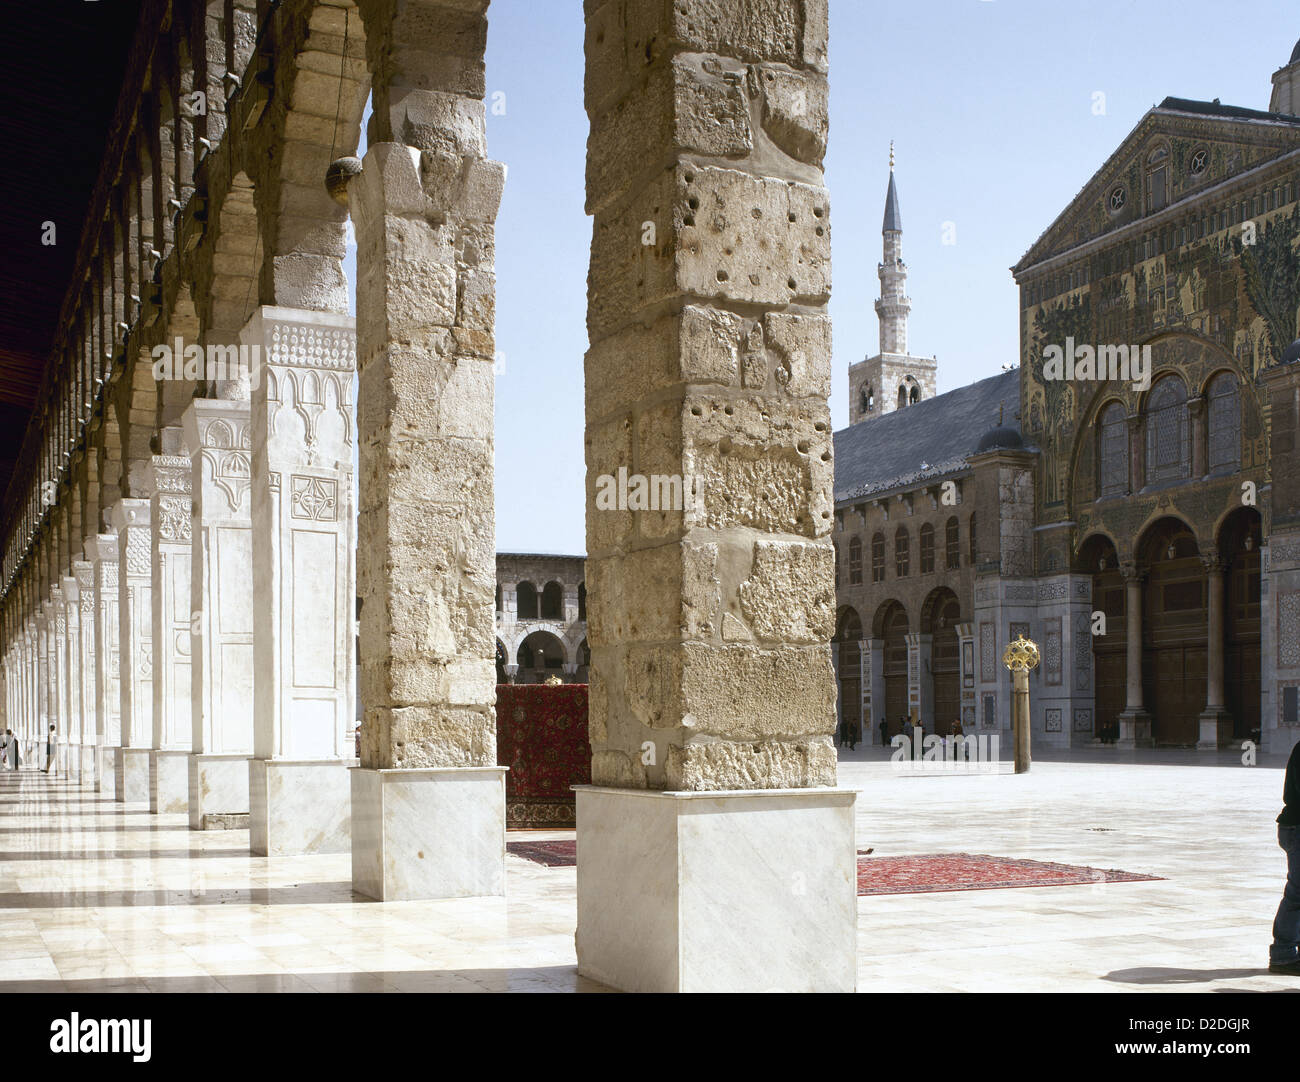 Syria. Damascus. Umayyad Mosque or Great Mosque of Damascus. Built in the early 8th century. Stock Photo